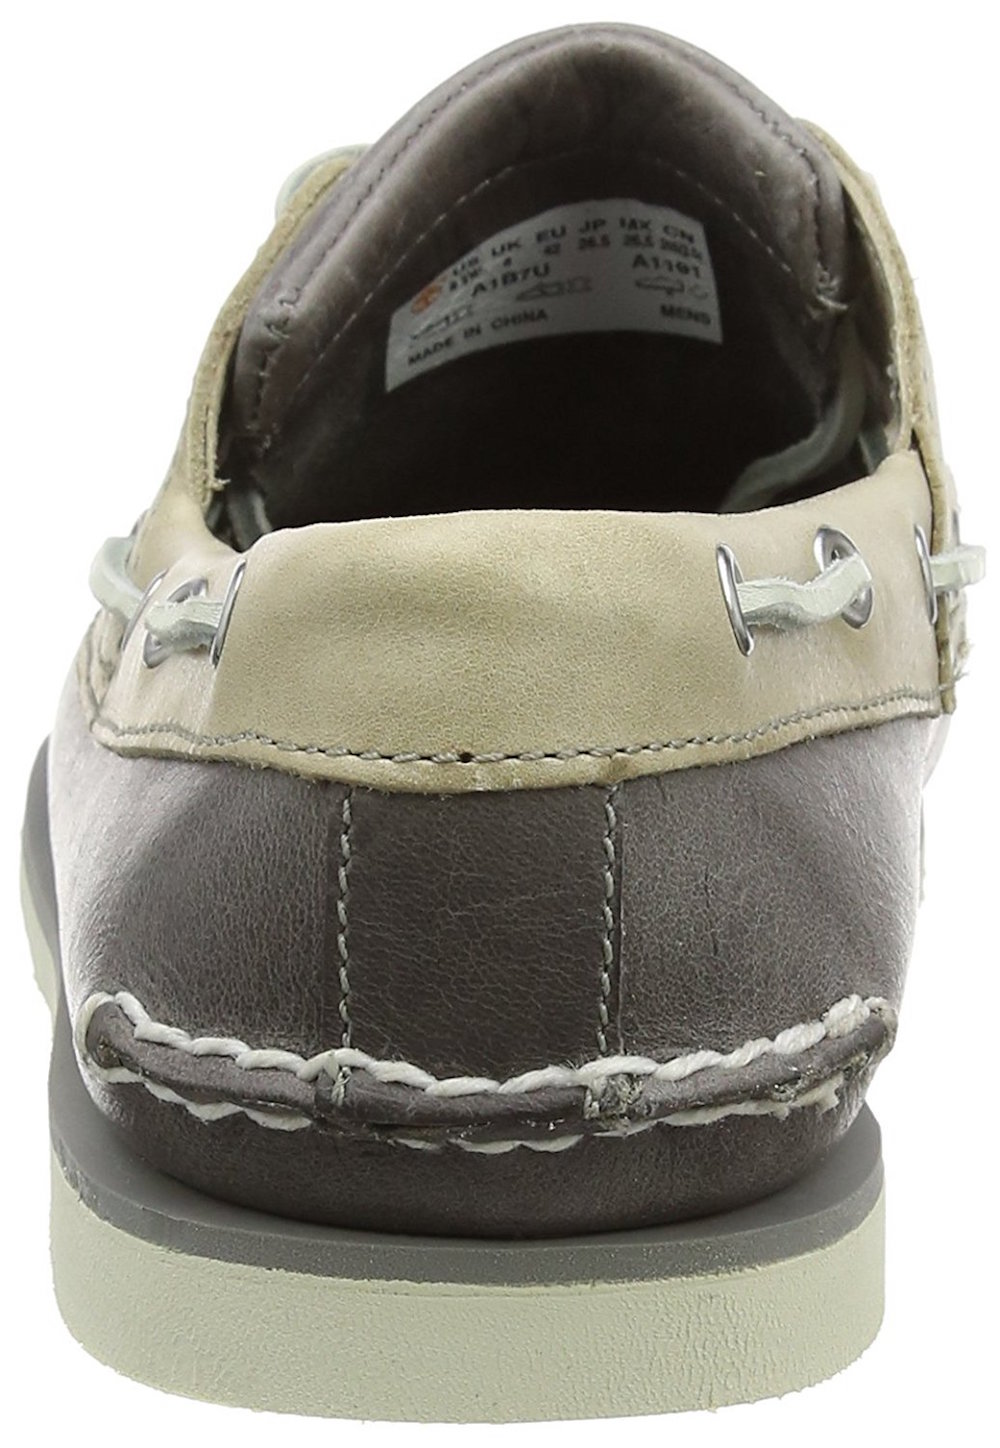 Timberland Mens Classic 2 eye boat shoe Closed Toe Penny Loafer, Grey ...